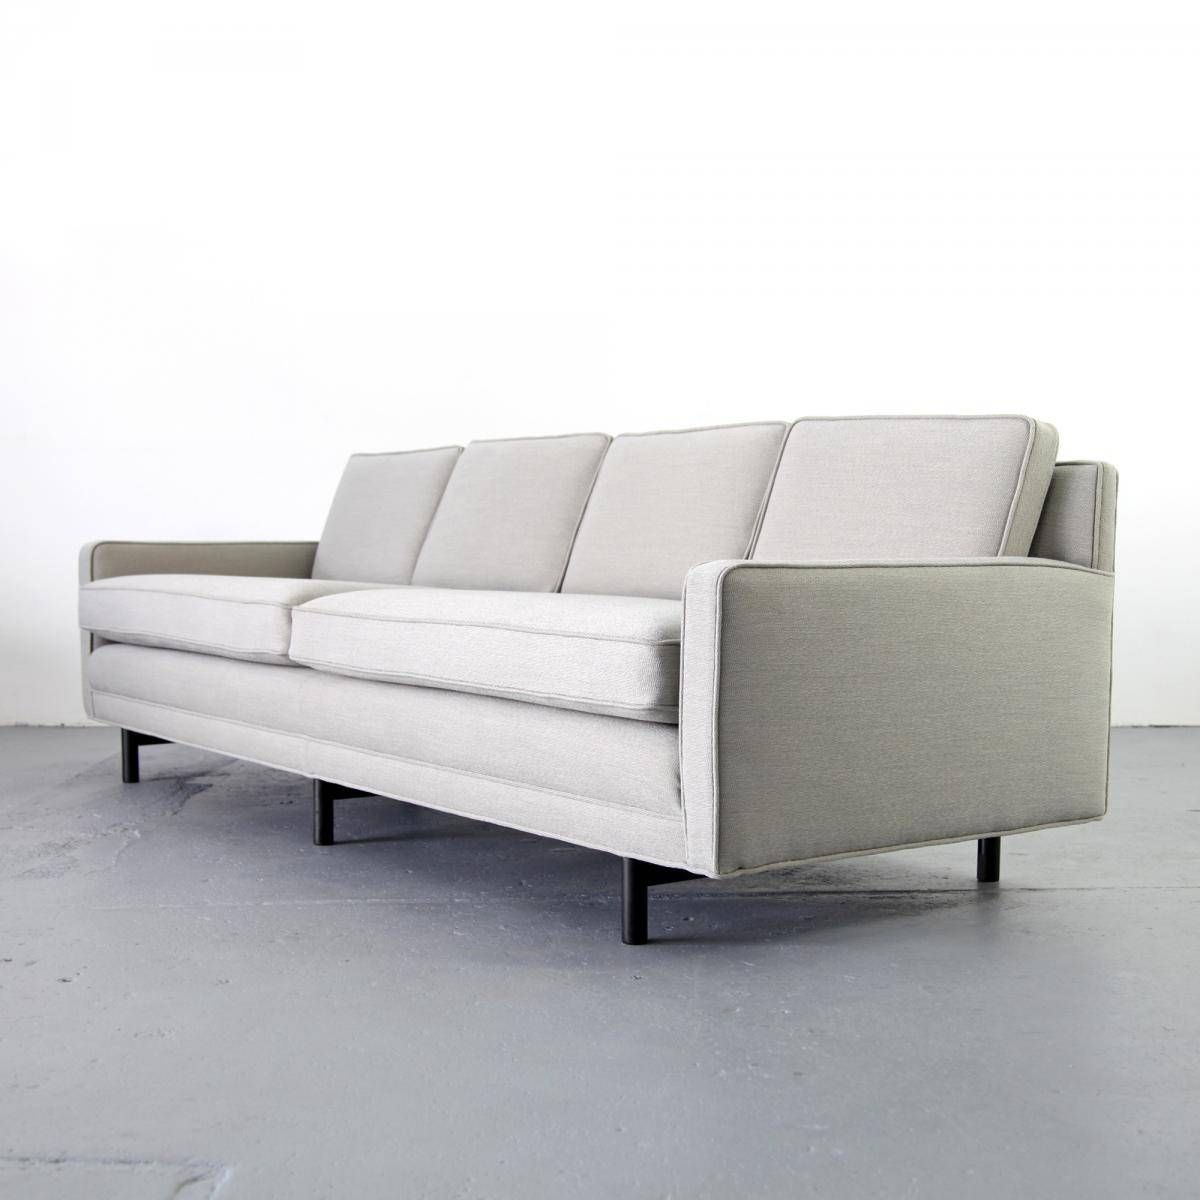 4 Seater Sofapaul Mccobb For Directional For Sale At Pamono Throughout 4 Seater Sofas (View 19 of 30)